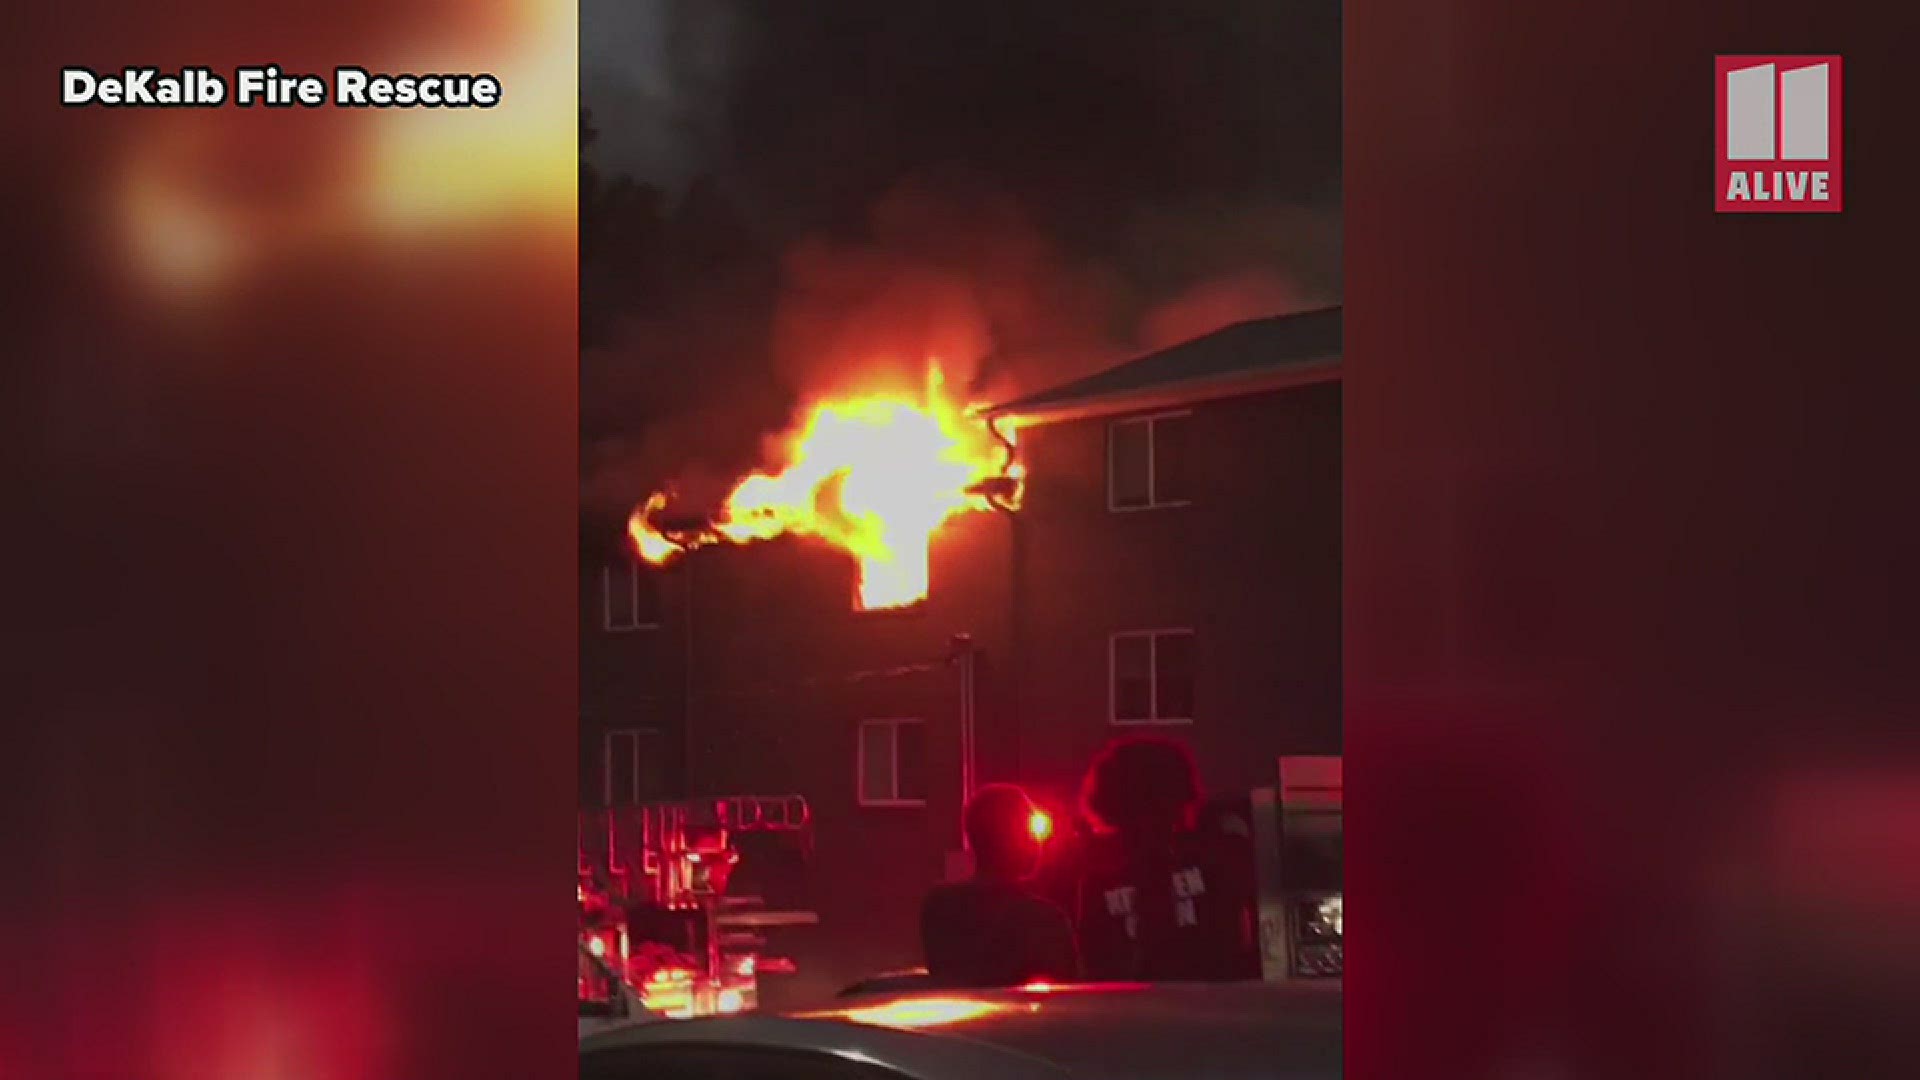 Despite the size of the fire, the quick work by first-responders meant no reported injuries.